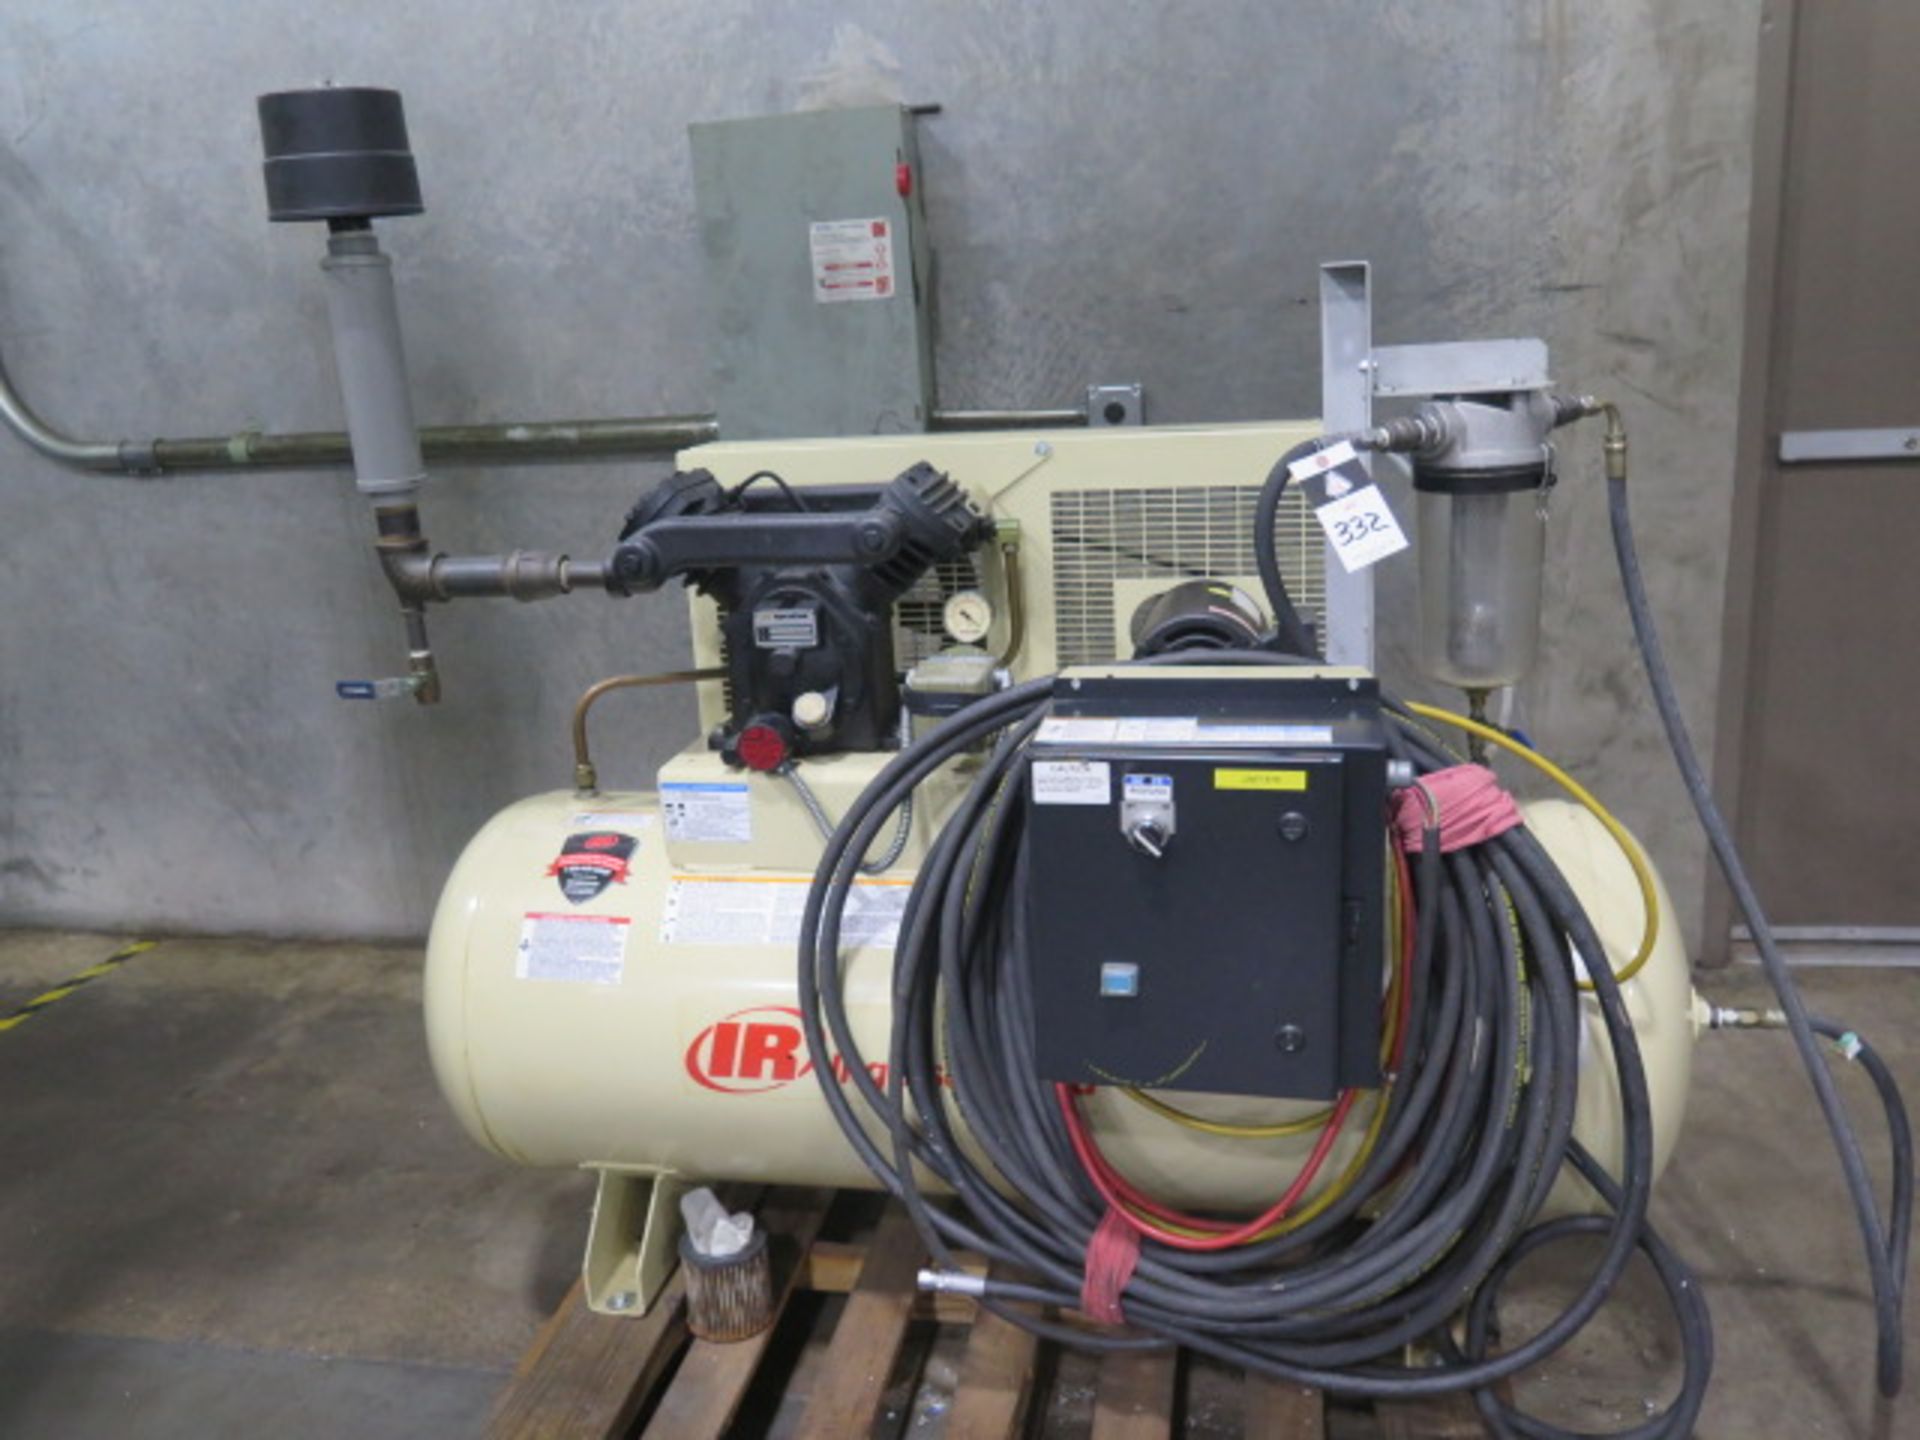 Ingersoll Rand V235D1.5 Vacuum Compressor s/n 0612150226 w/ 1.5Hp Motor, 80 Gallon Tank SOLD AS IS